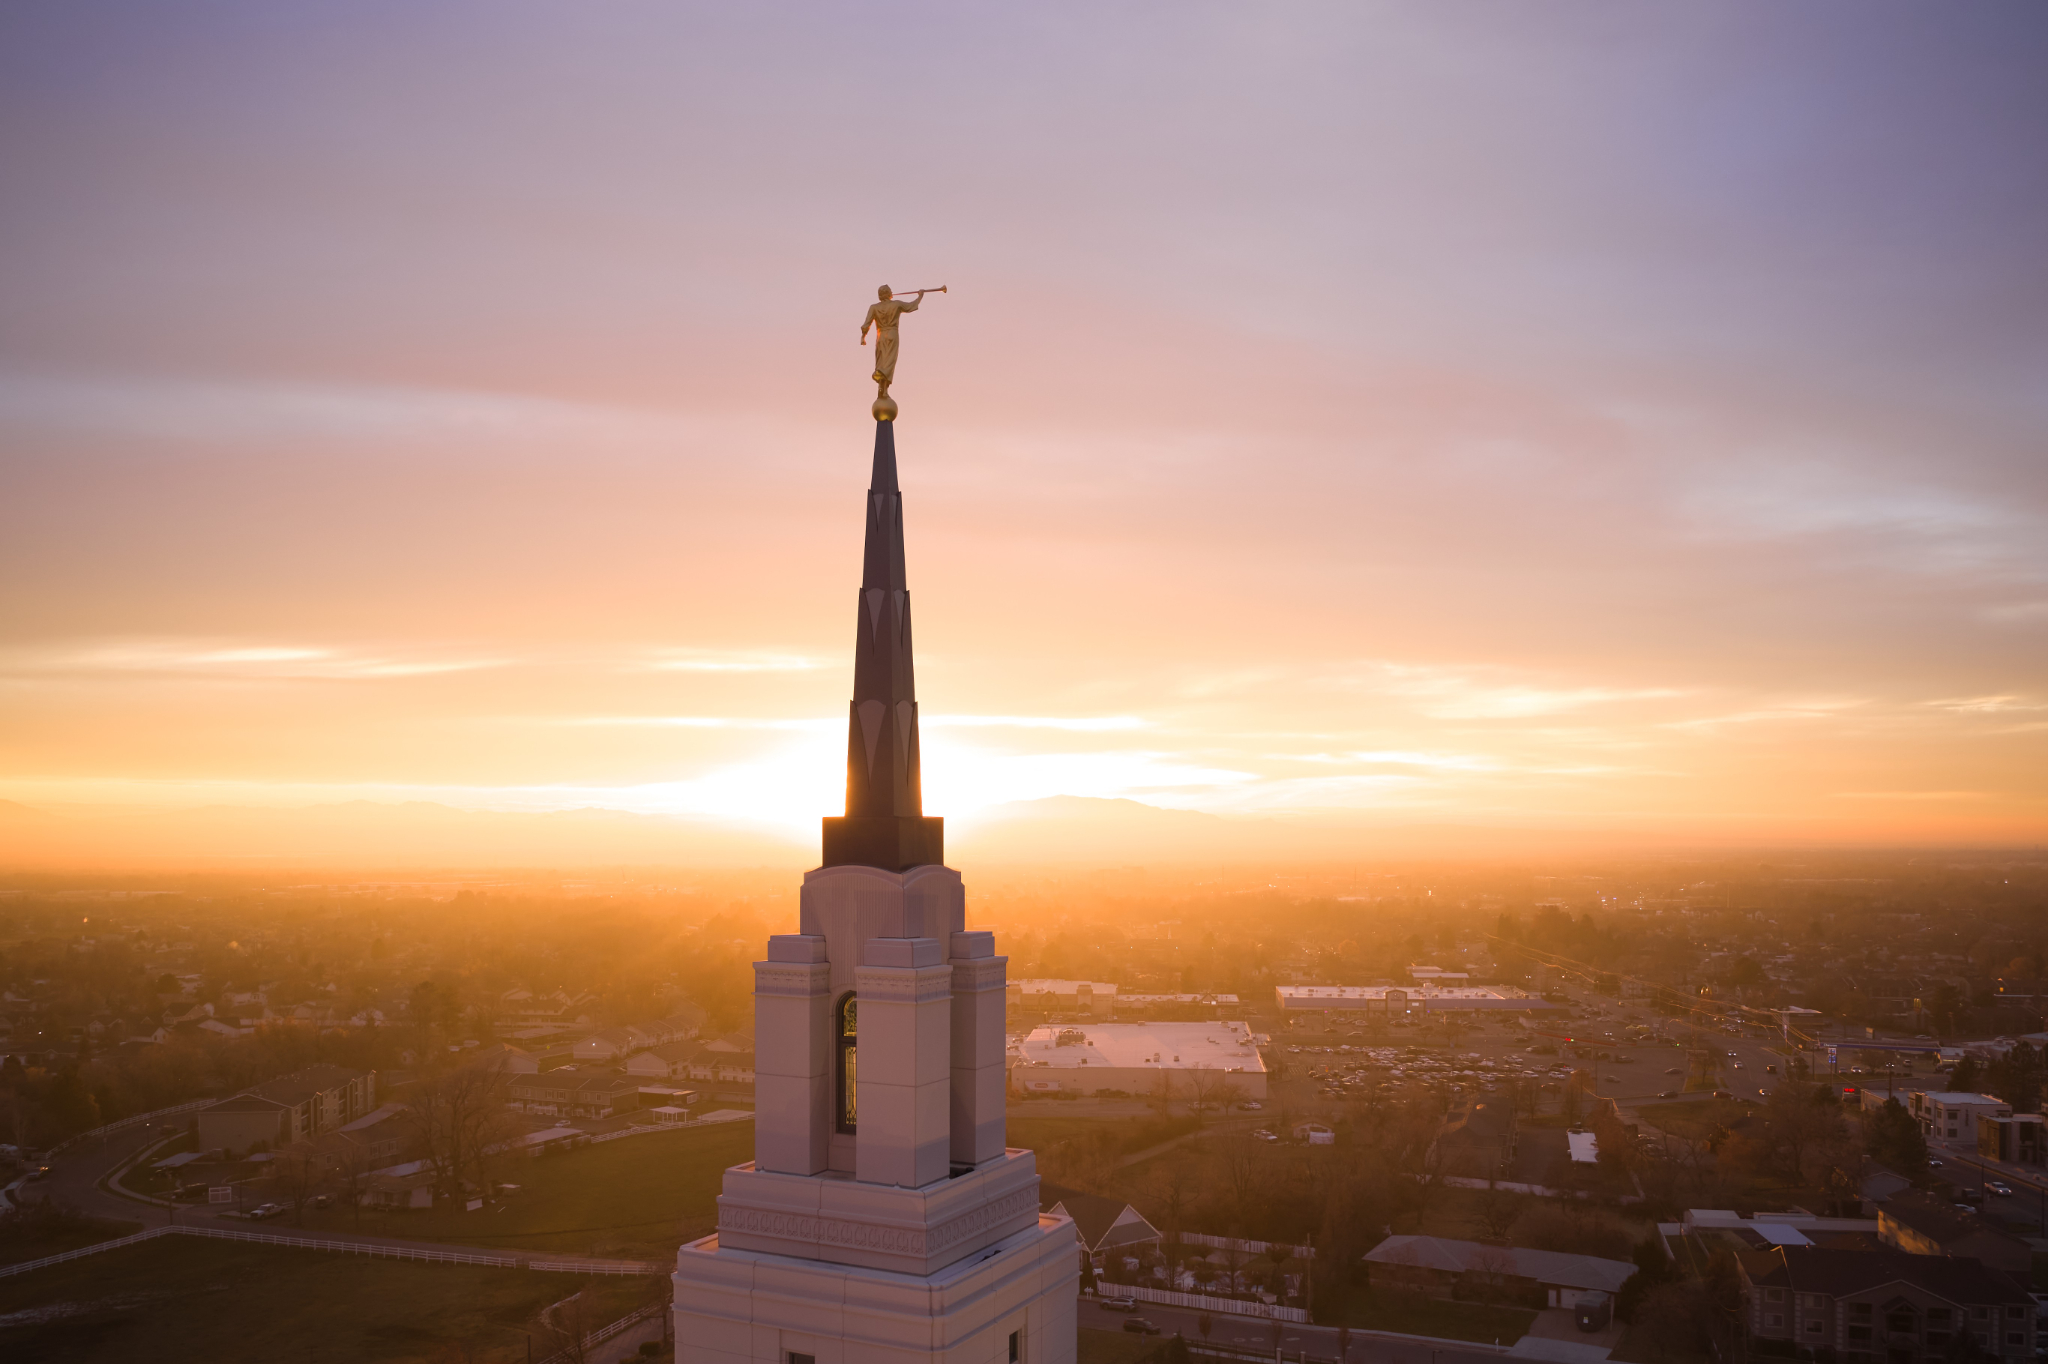 Layton Utah temple photo show with others in Utah announced at West Jordan and Lehi...